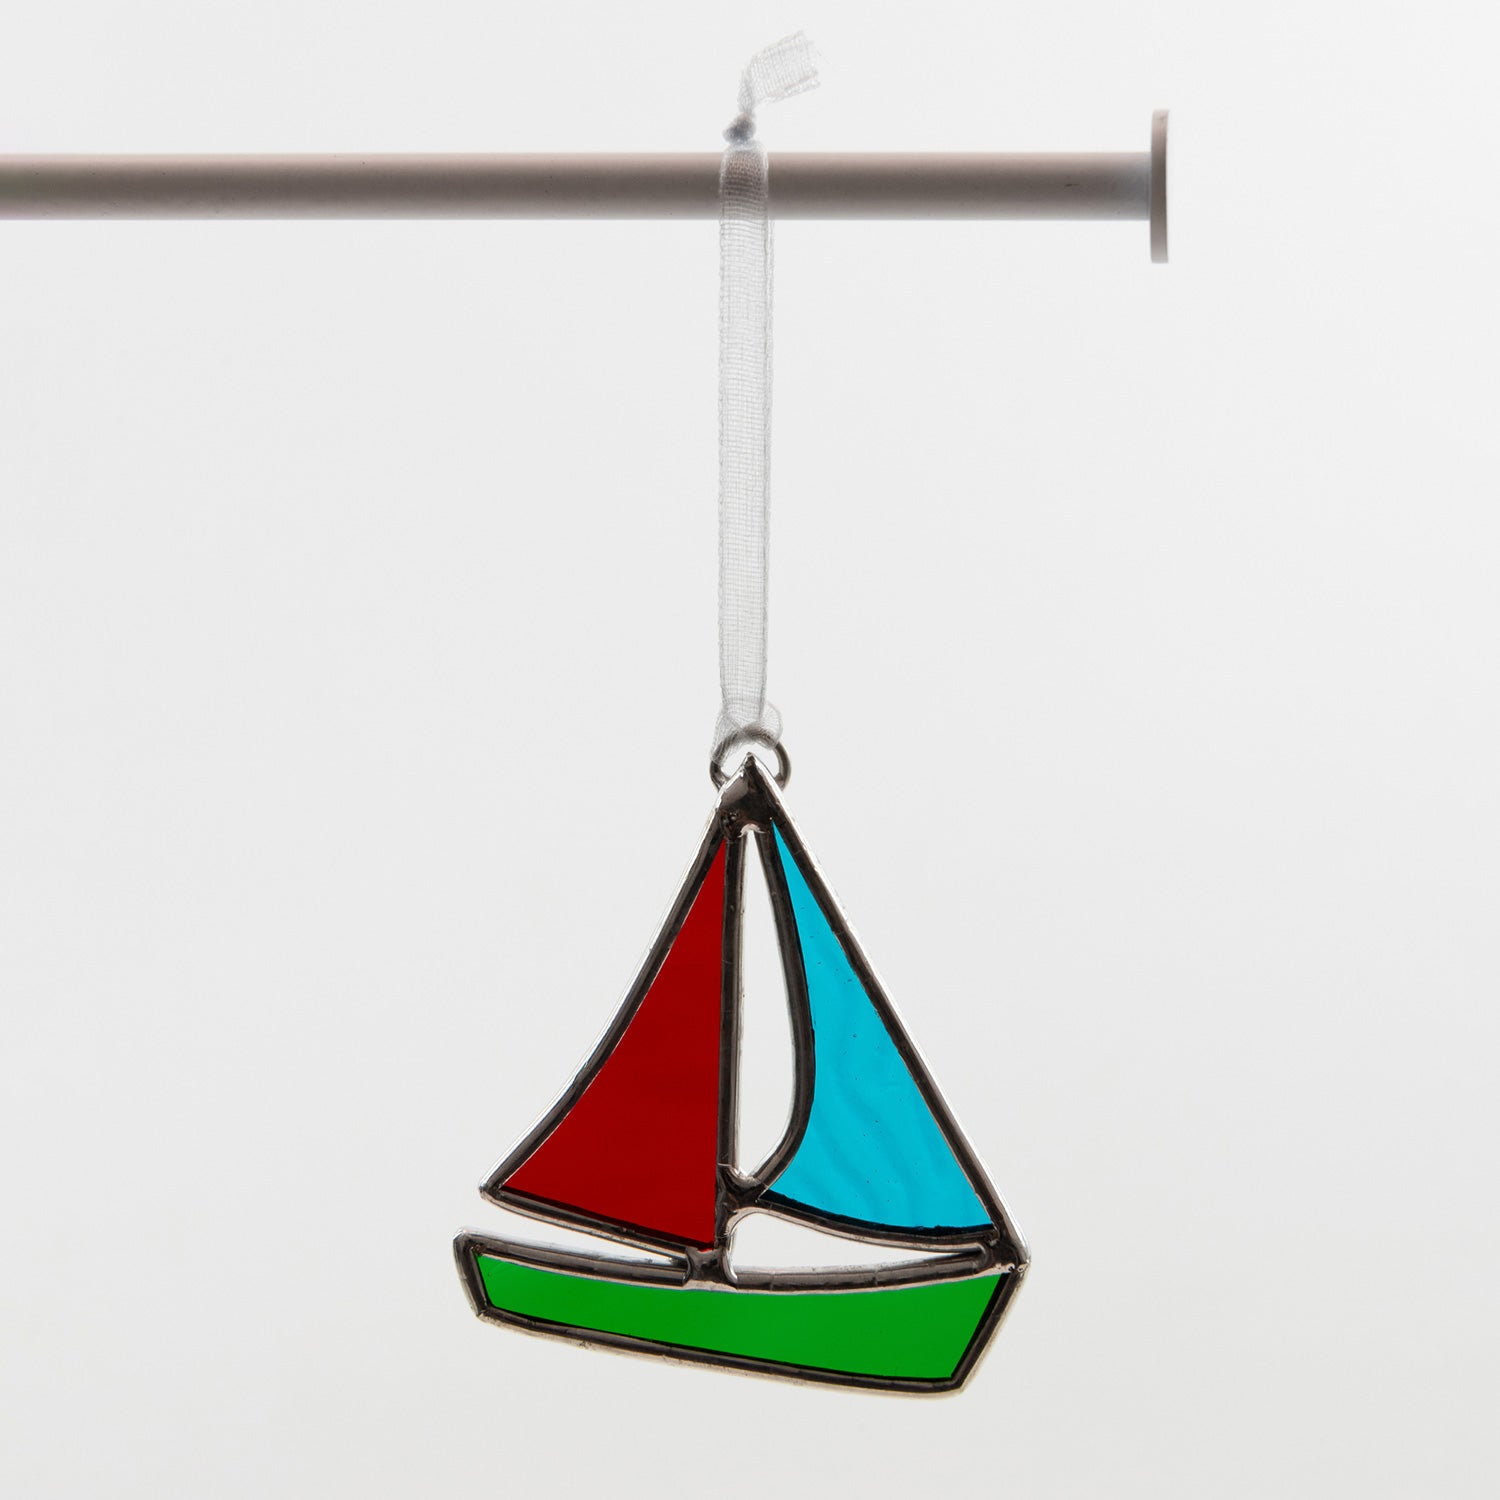 Glass sailboat decoration hanging from a light grey ribbon. This sailboat is made from red, green and blue glass.